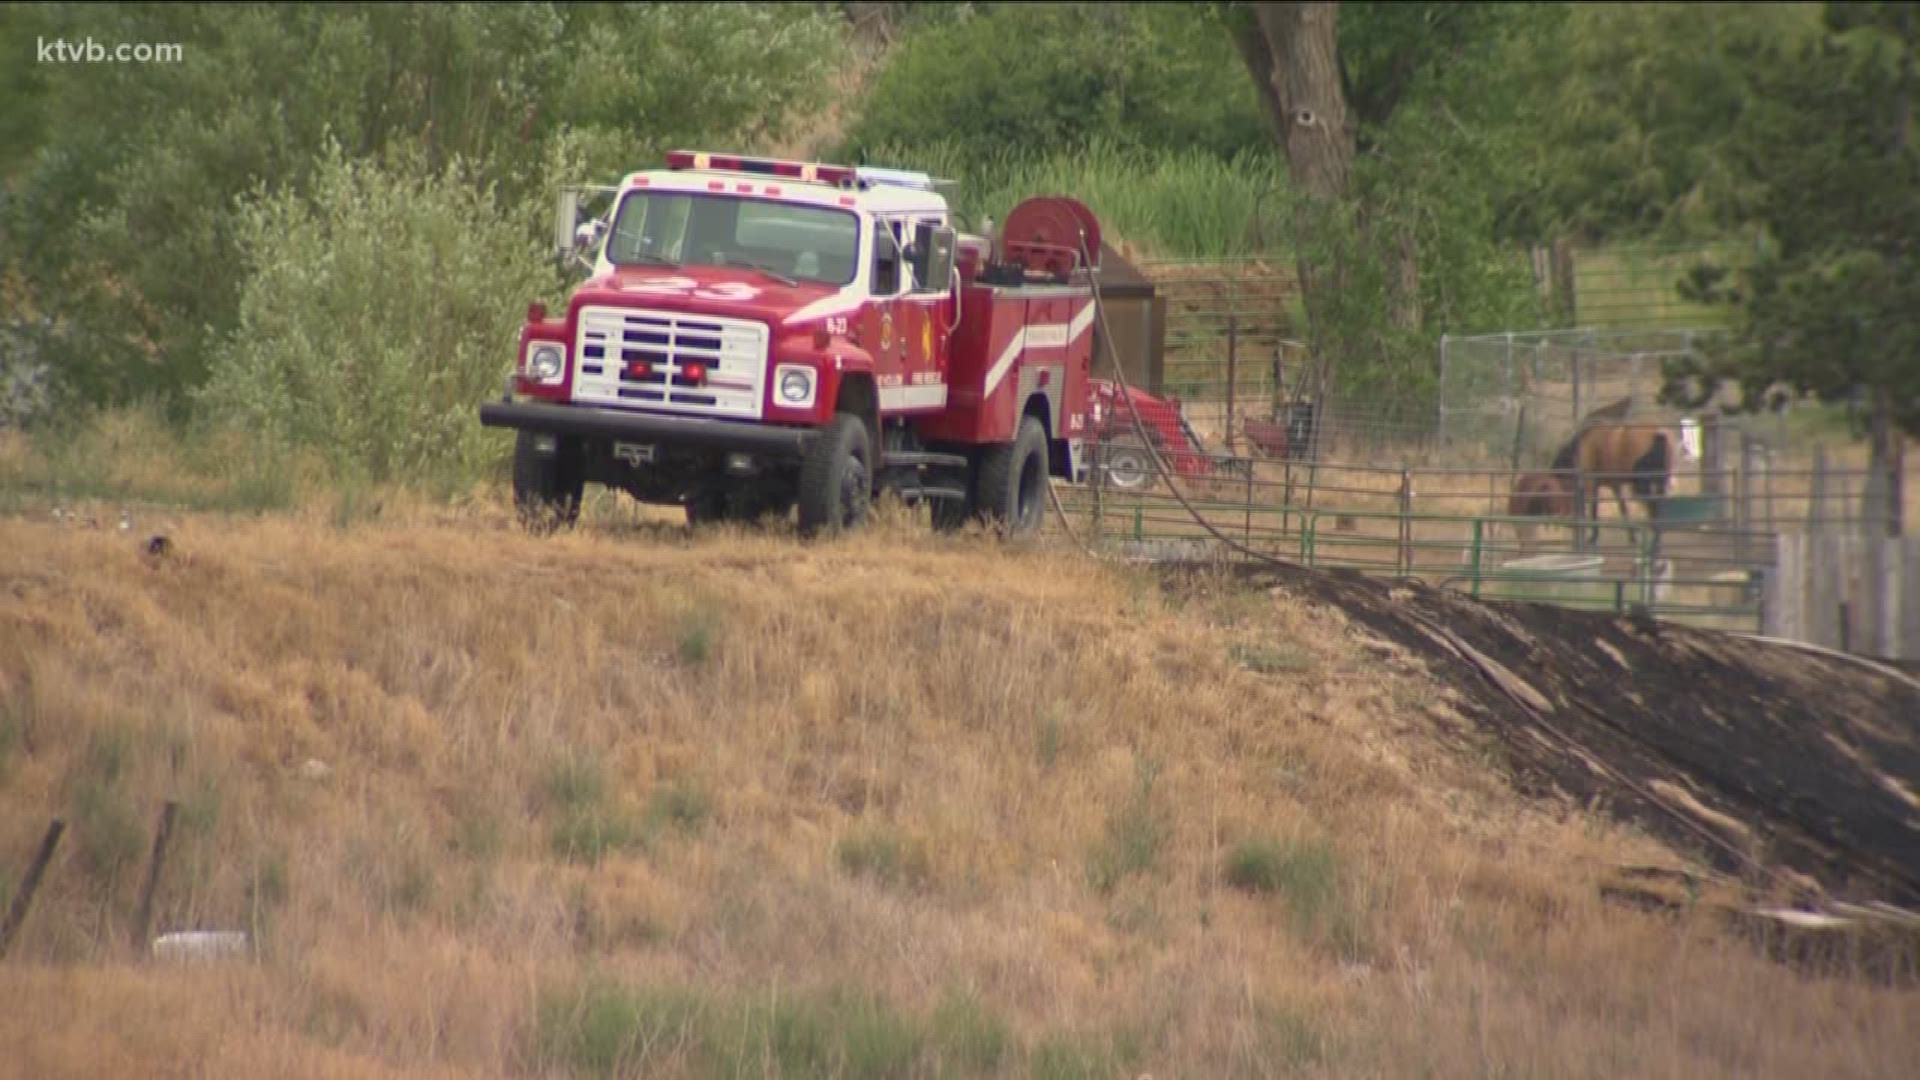 The fire burned an estimated 10-15 acres Saturday afternoon. Some pickups, a boat and three outbuildings were destroyed.